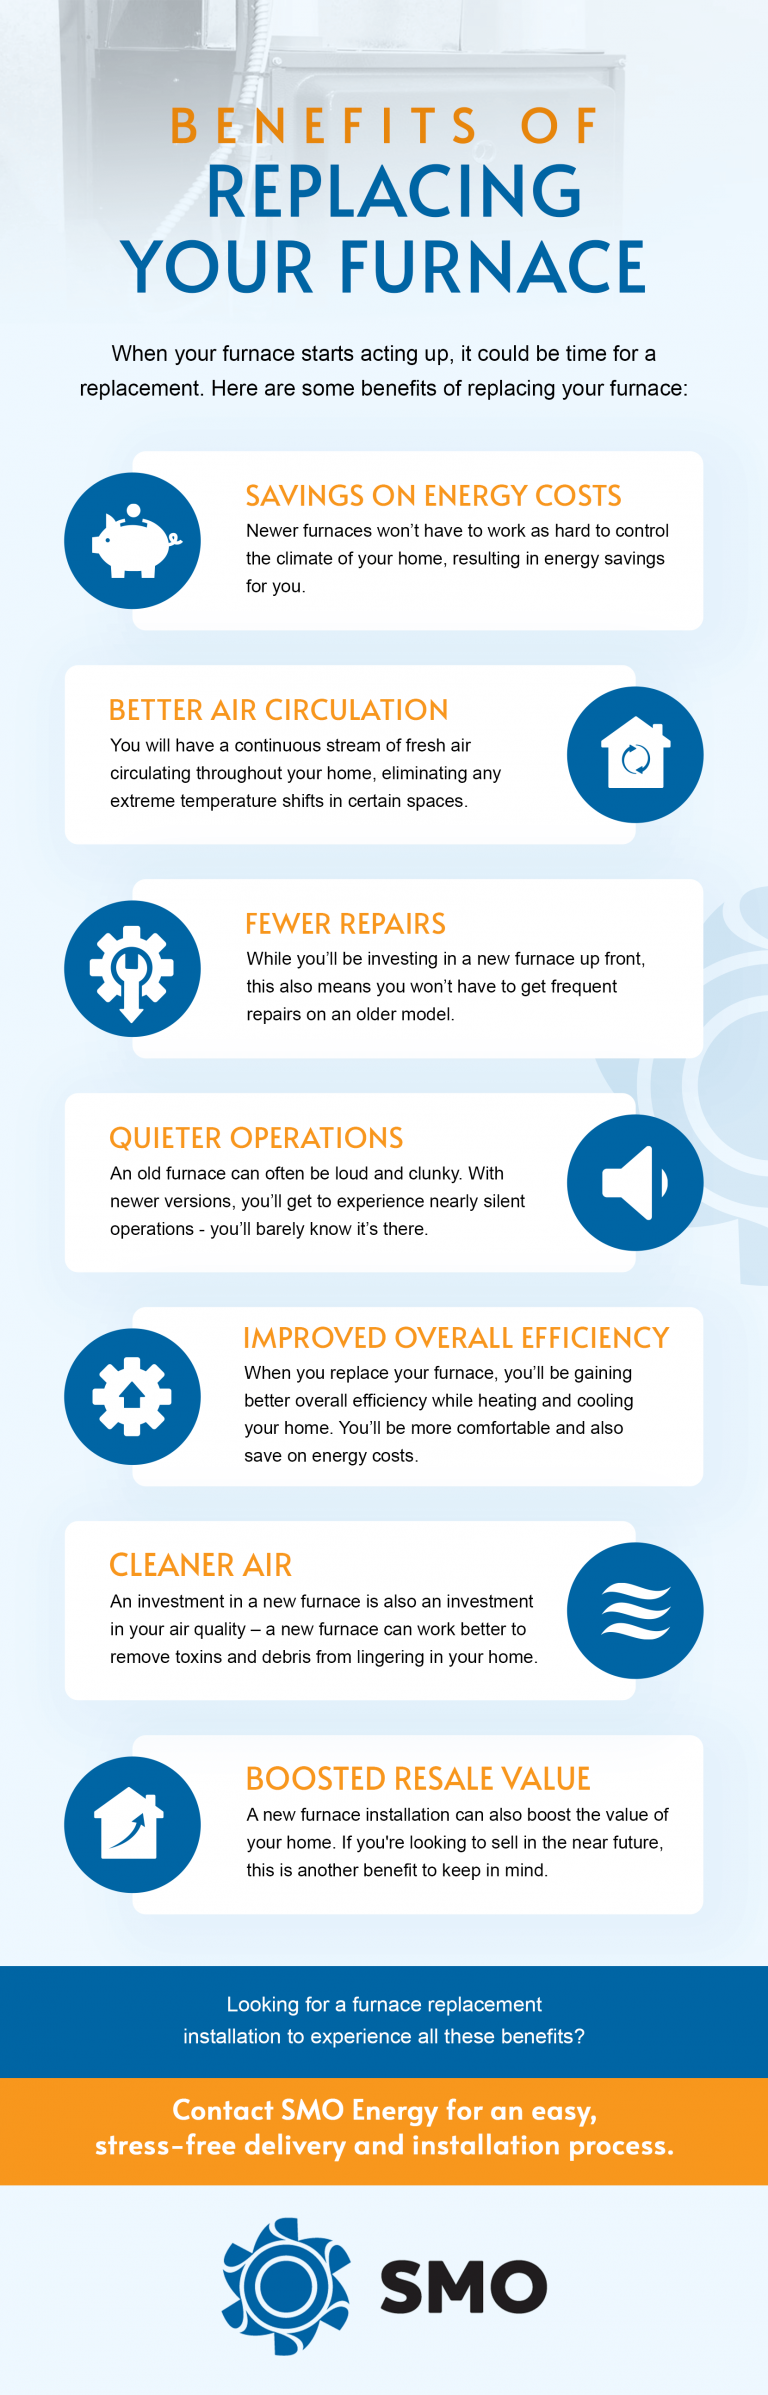 Benefits of replacing your furnace